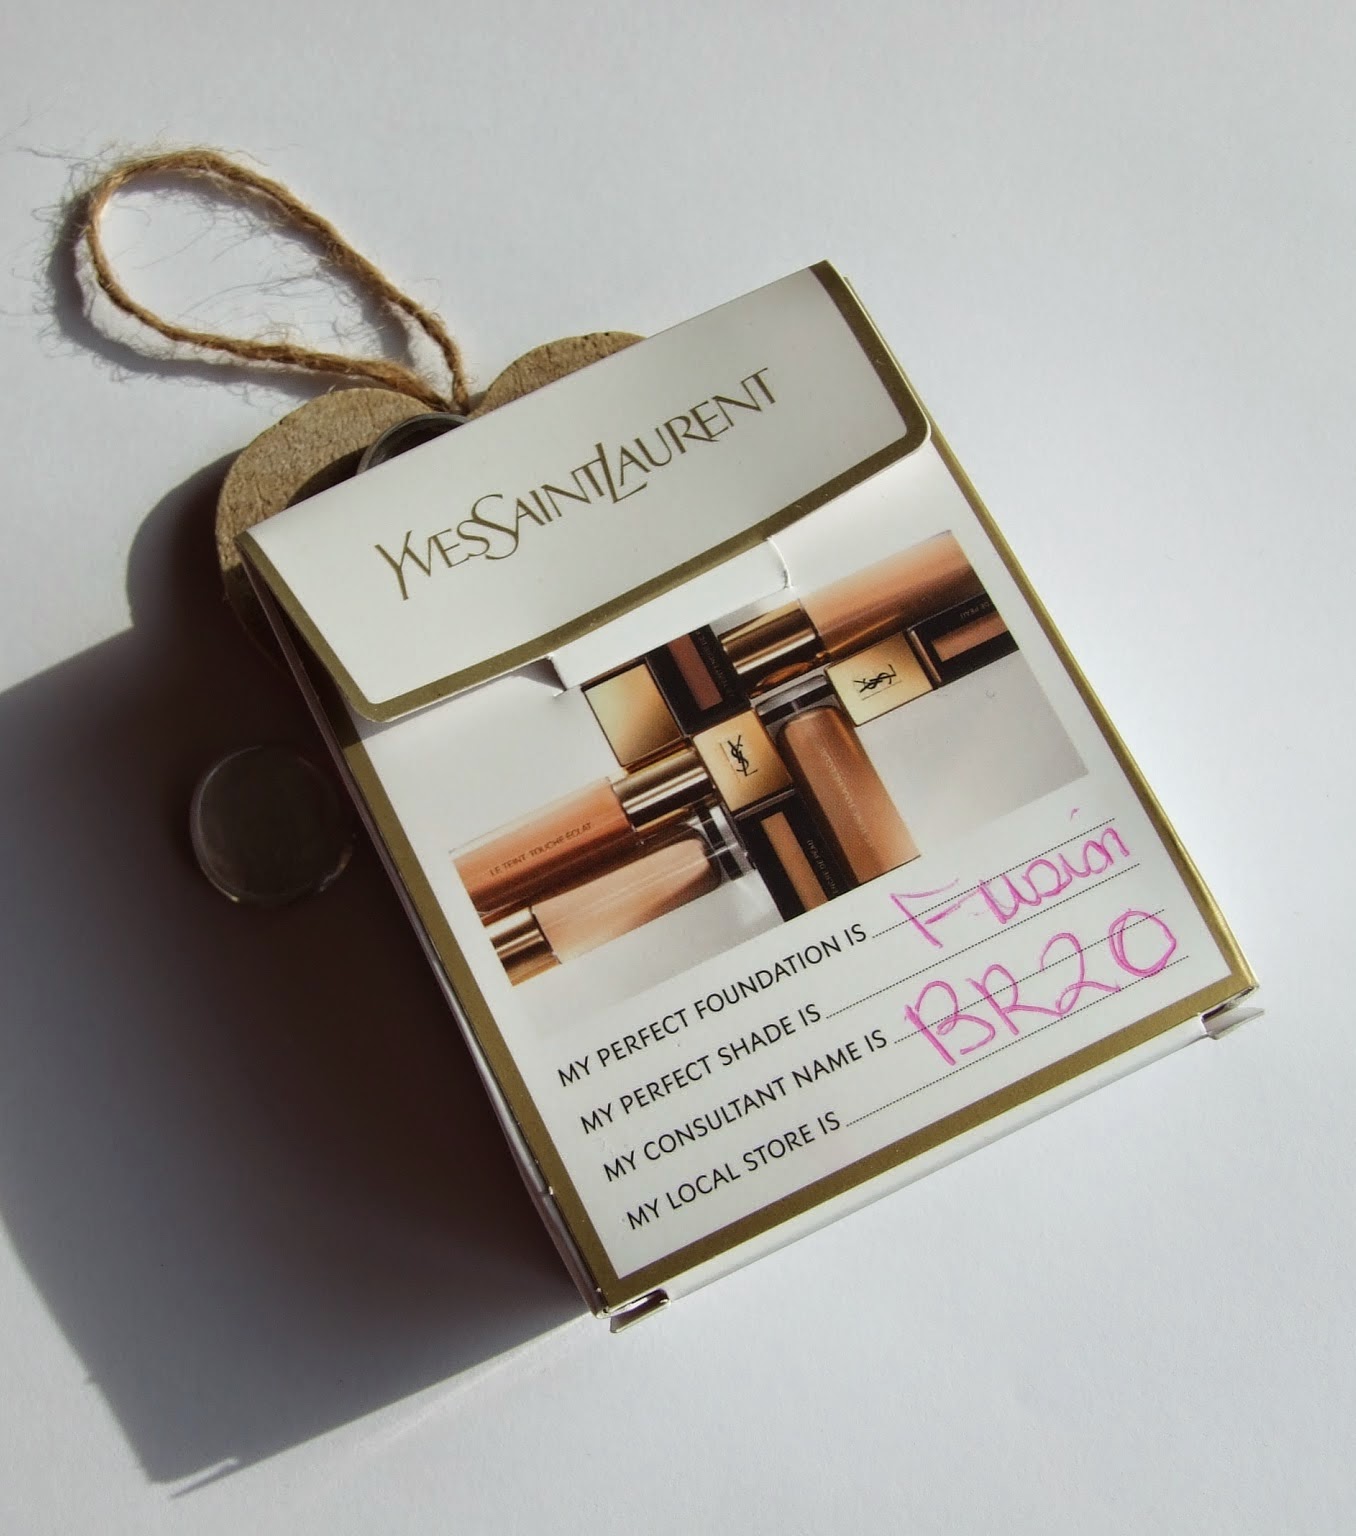 YSL fusion ink foundation sample br20 blog review